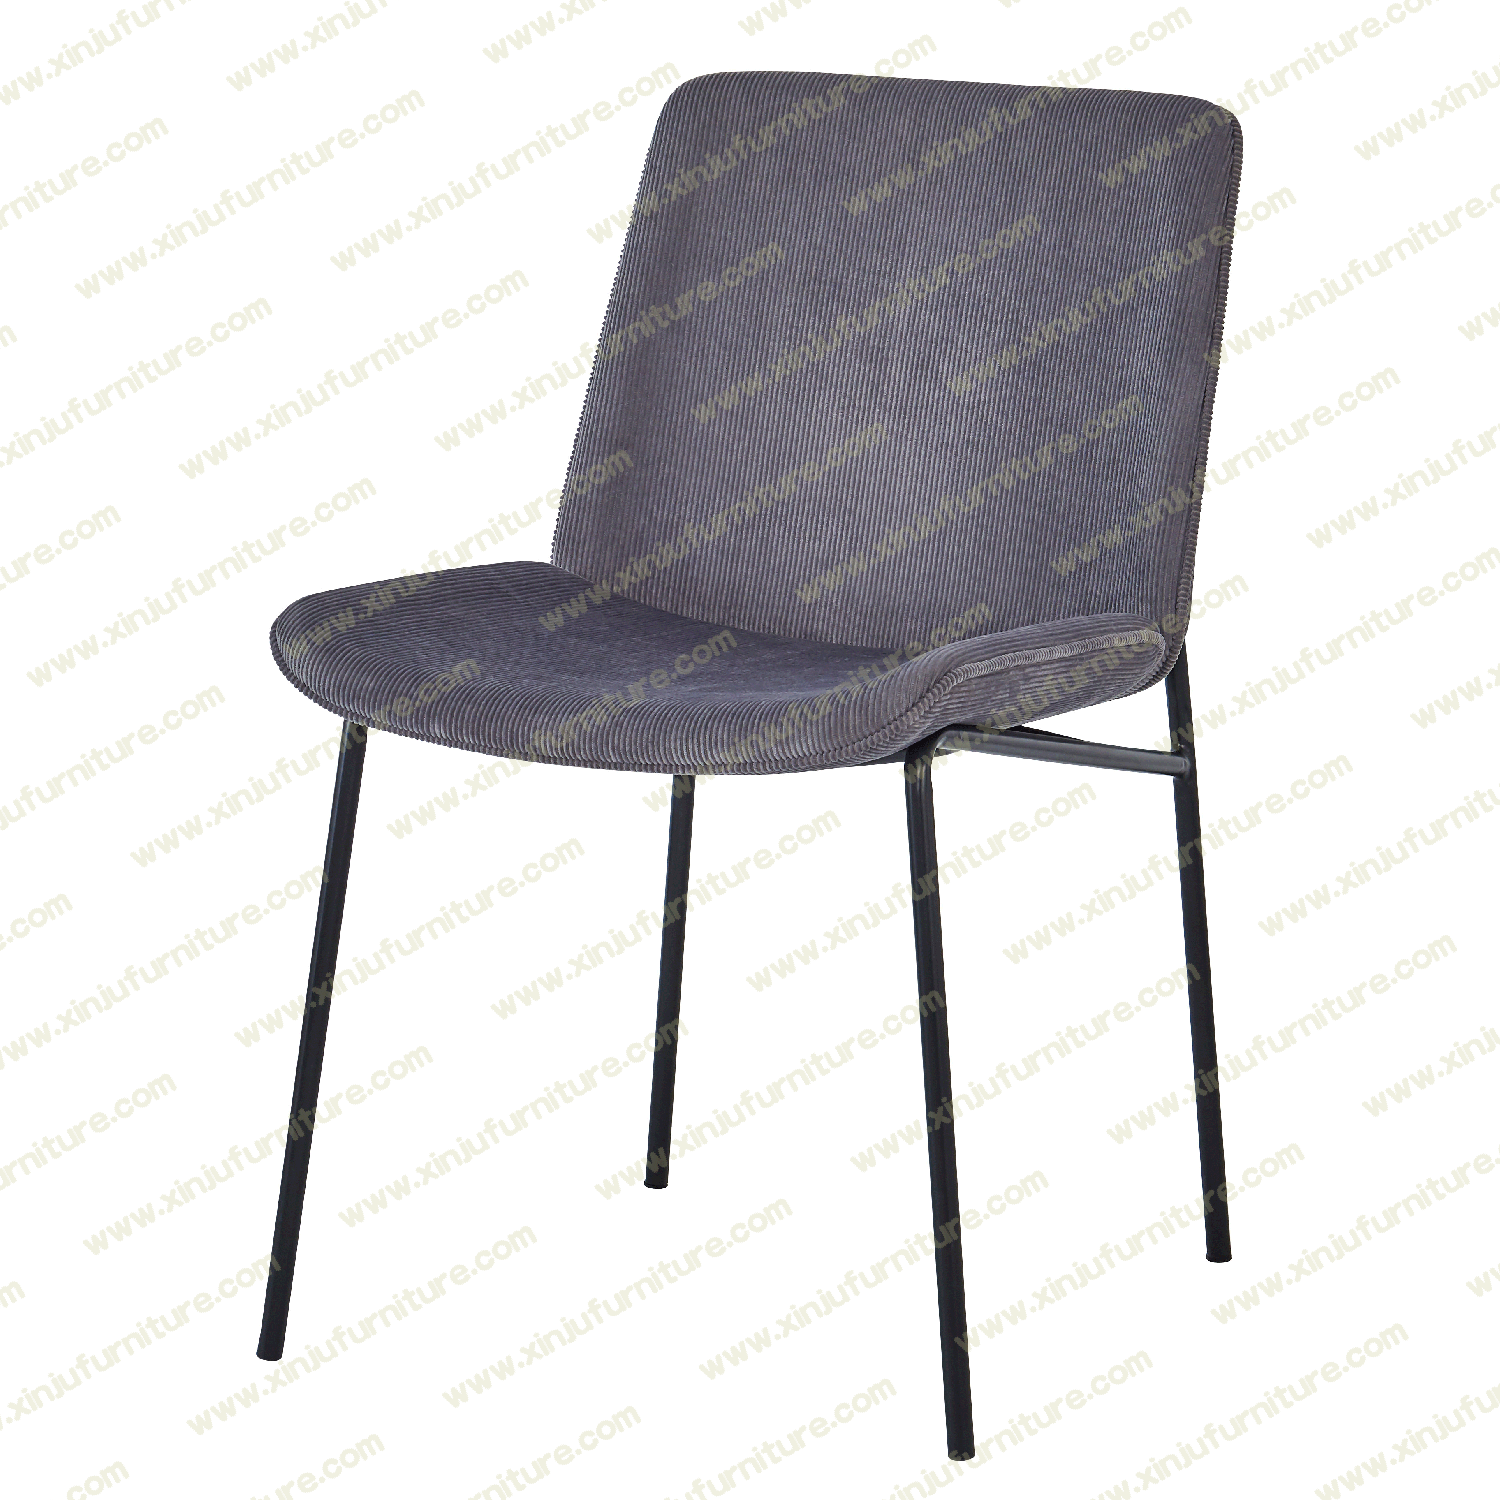 Classic shape durable dining chair